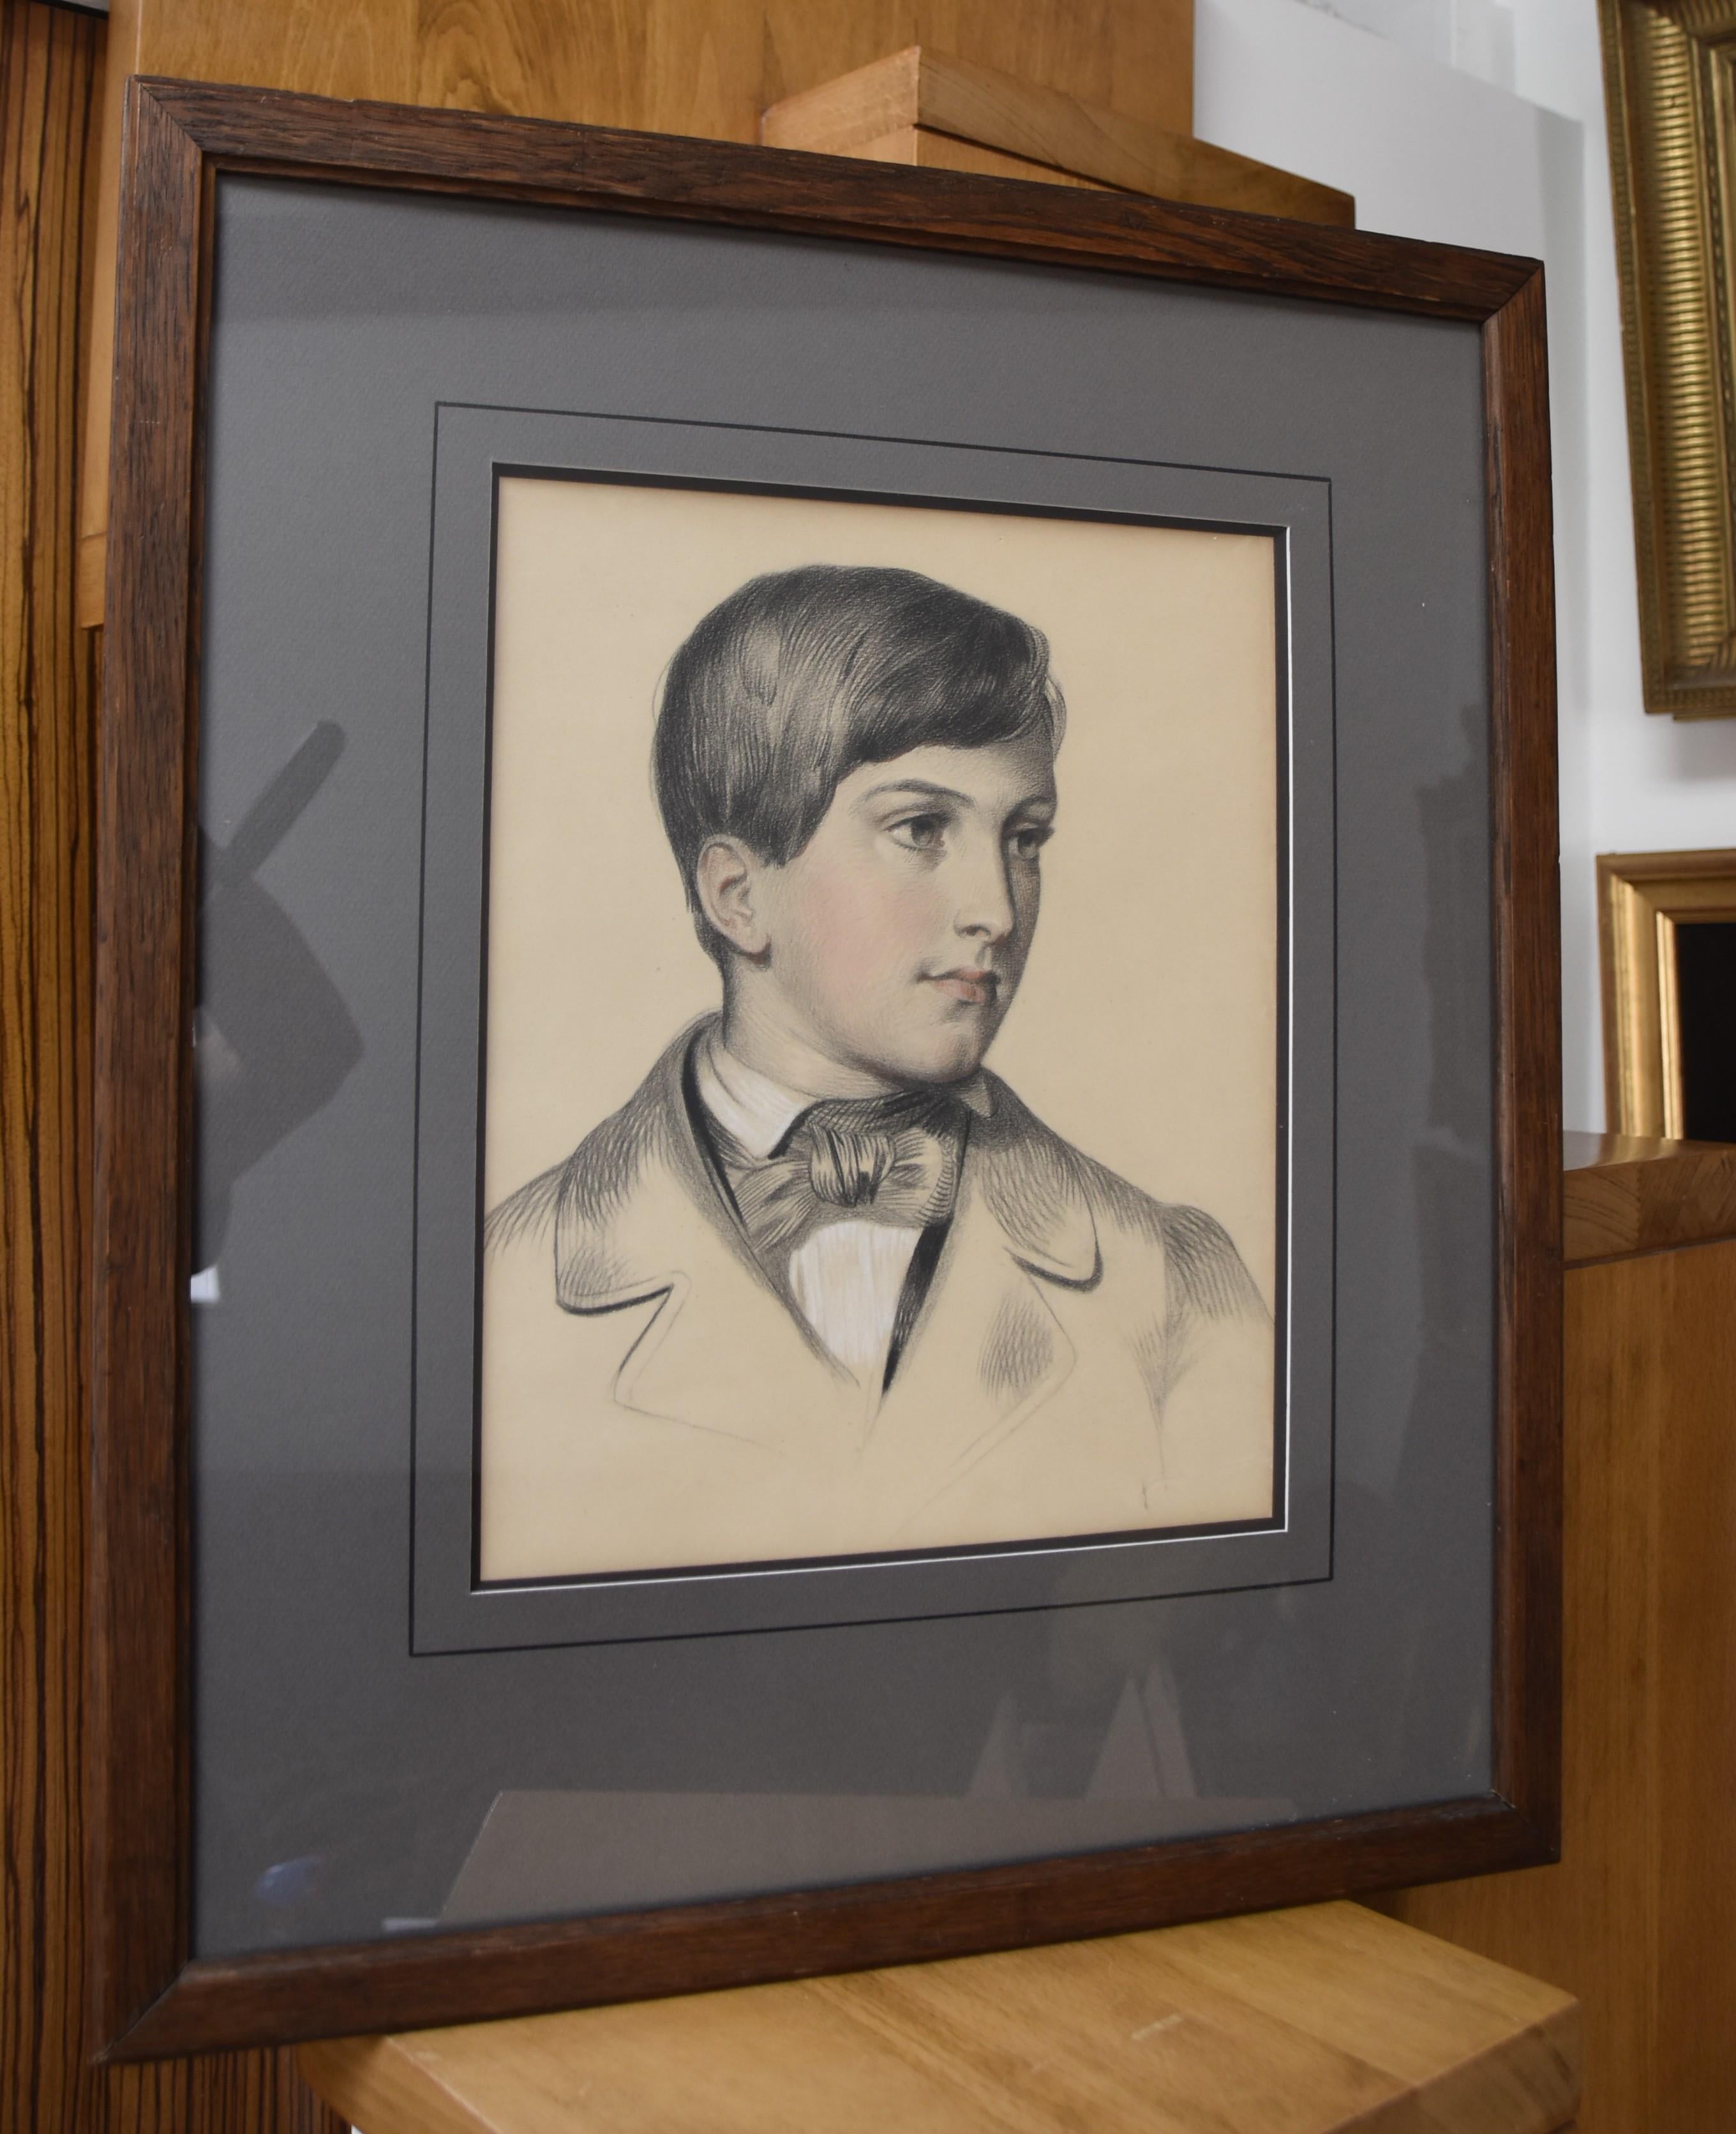 French School 19th century, Portrait of a young boy, drawing  - Romantic Art by Unknown